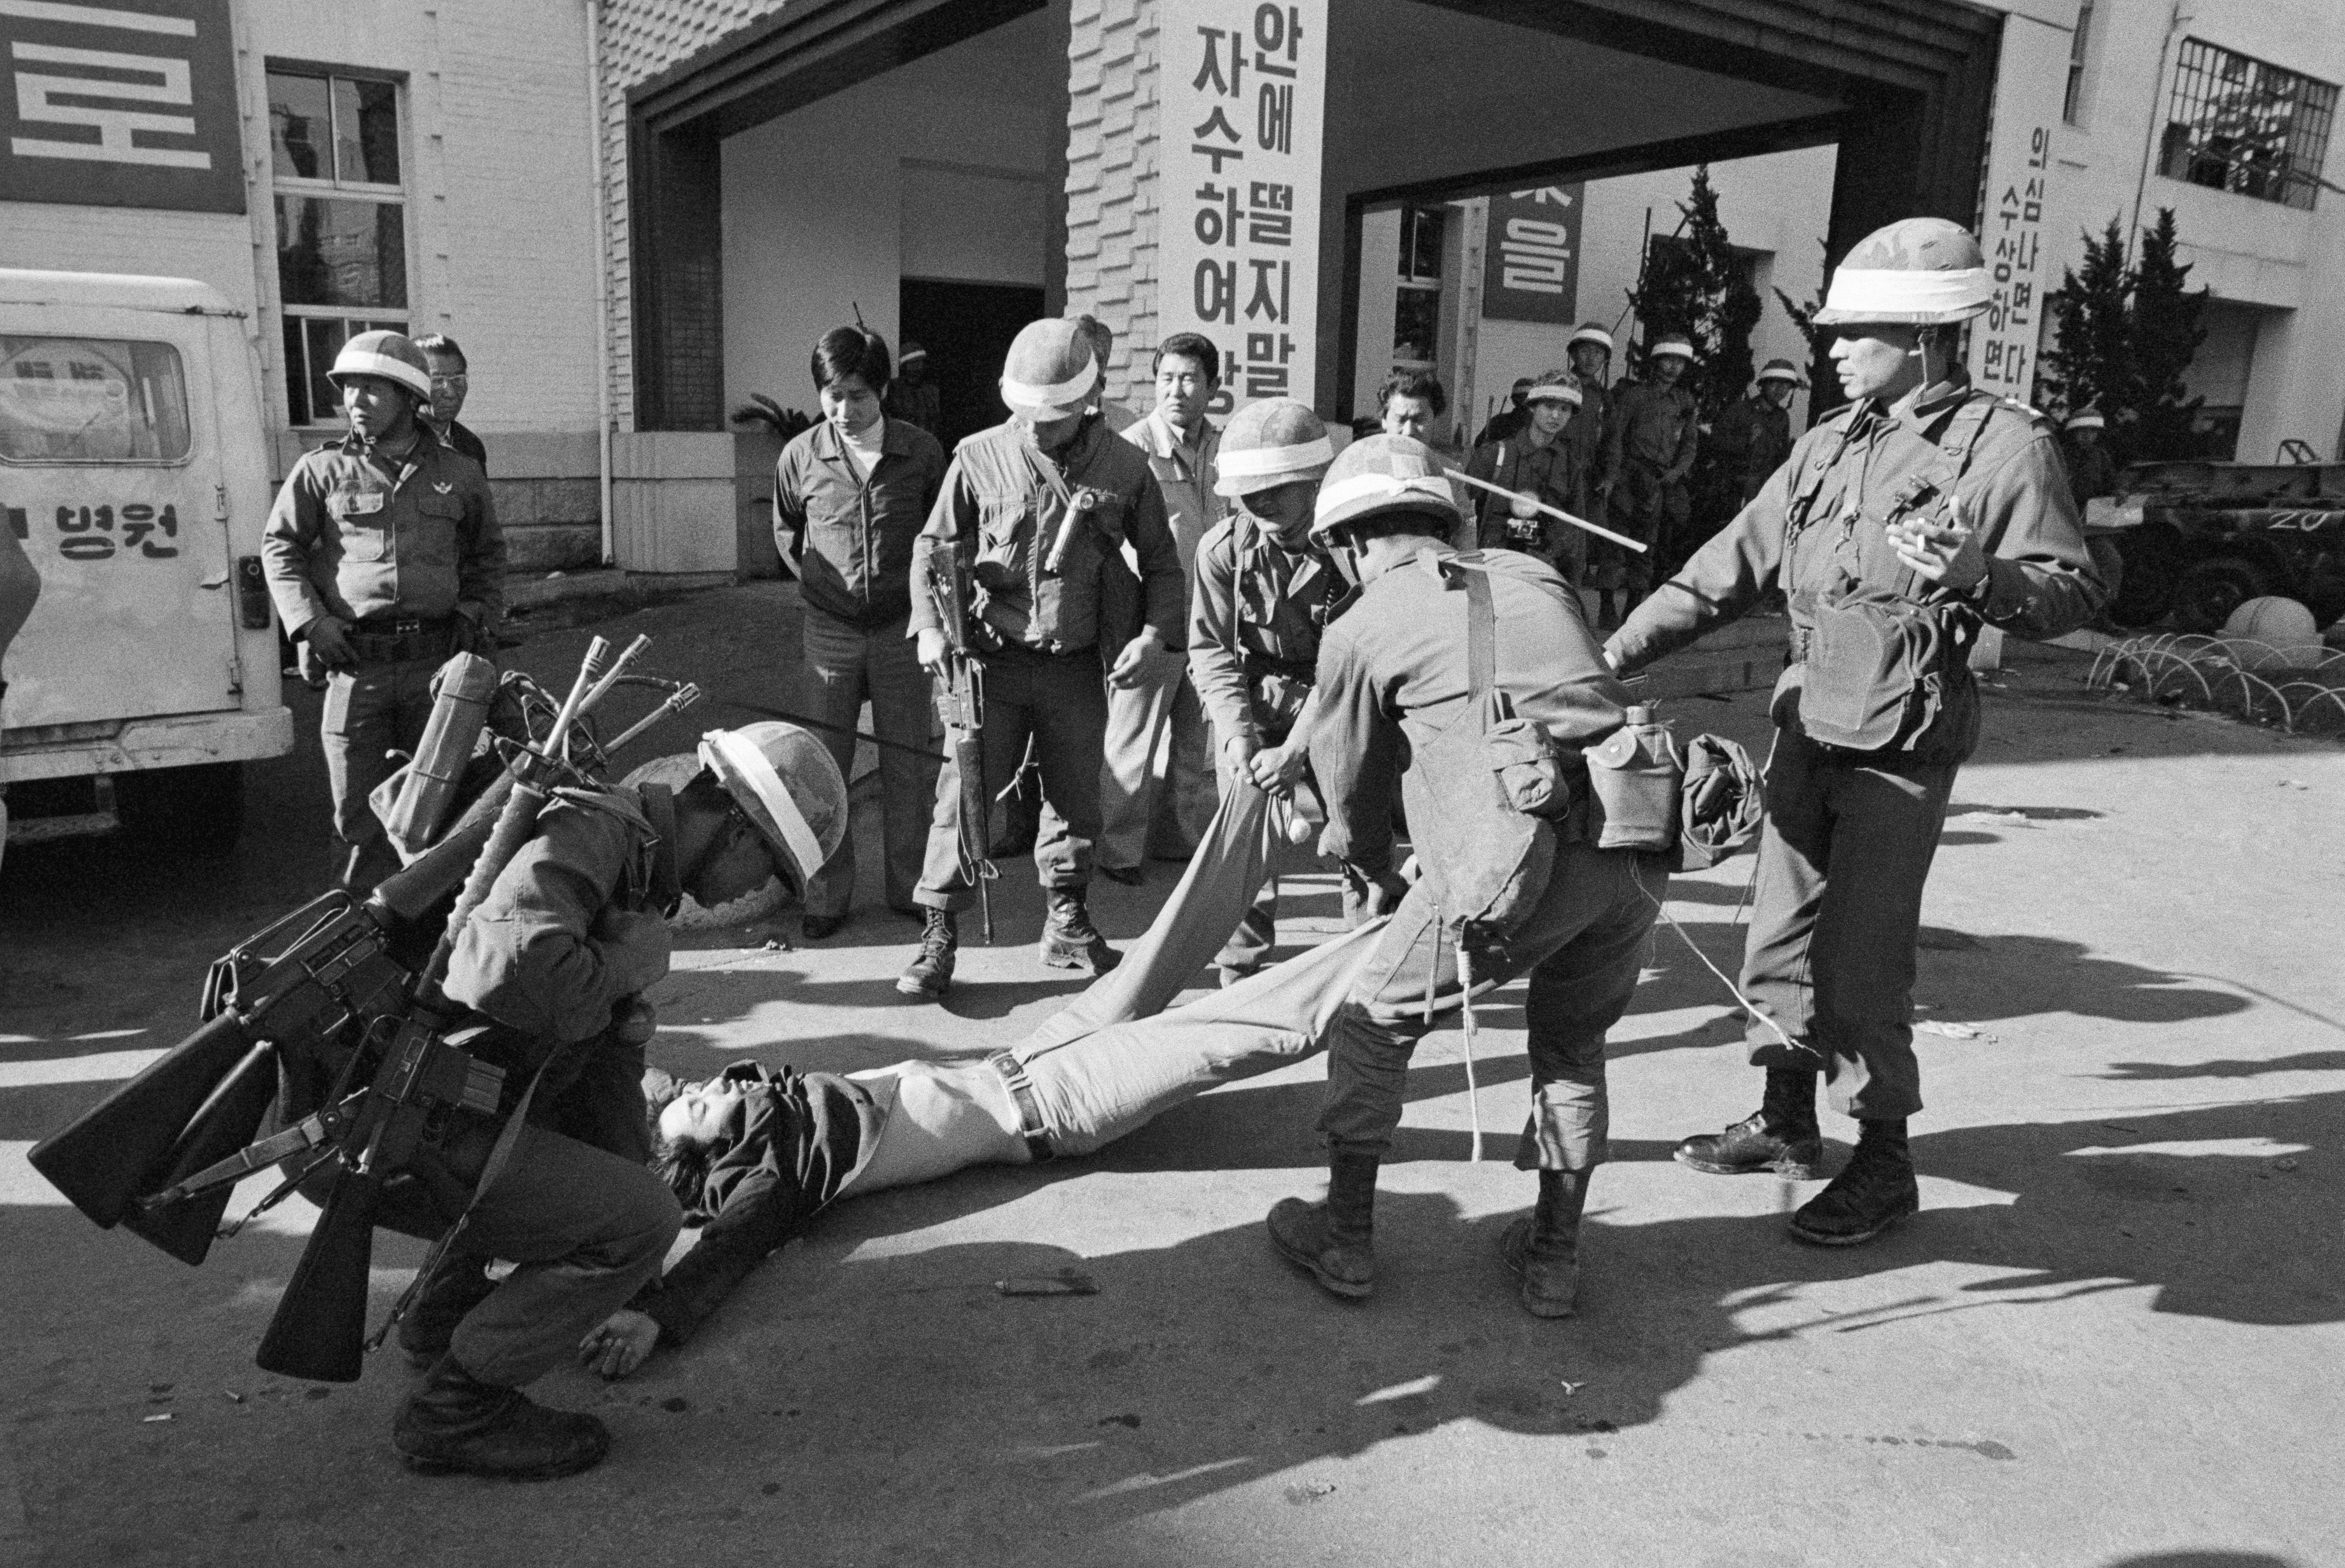 The rioters in the South Korean city of Gwangju were crushed on May 27, 1980, after one week of fighting. Photo: Sygma